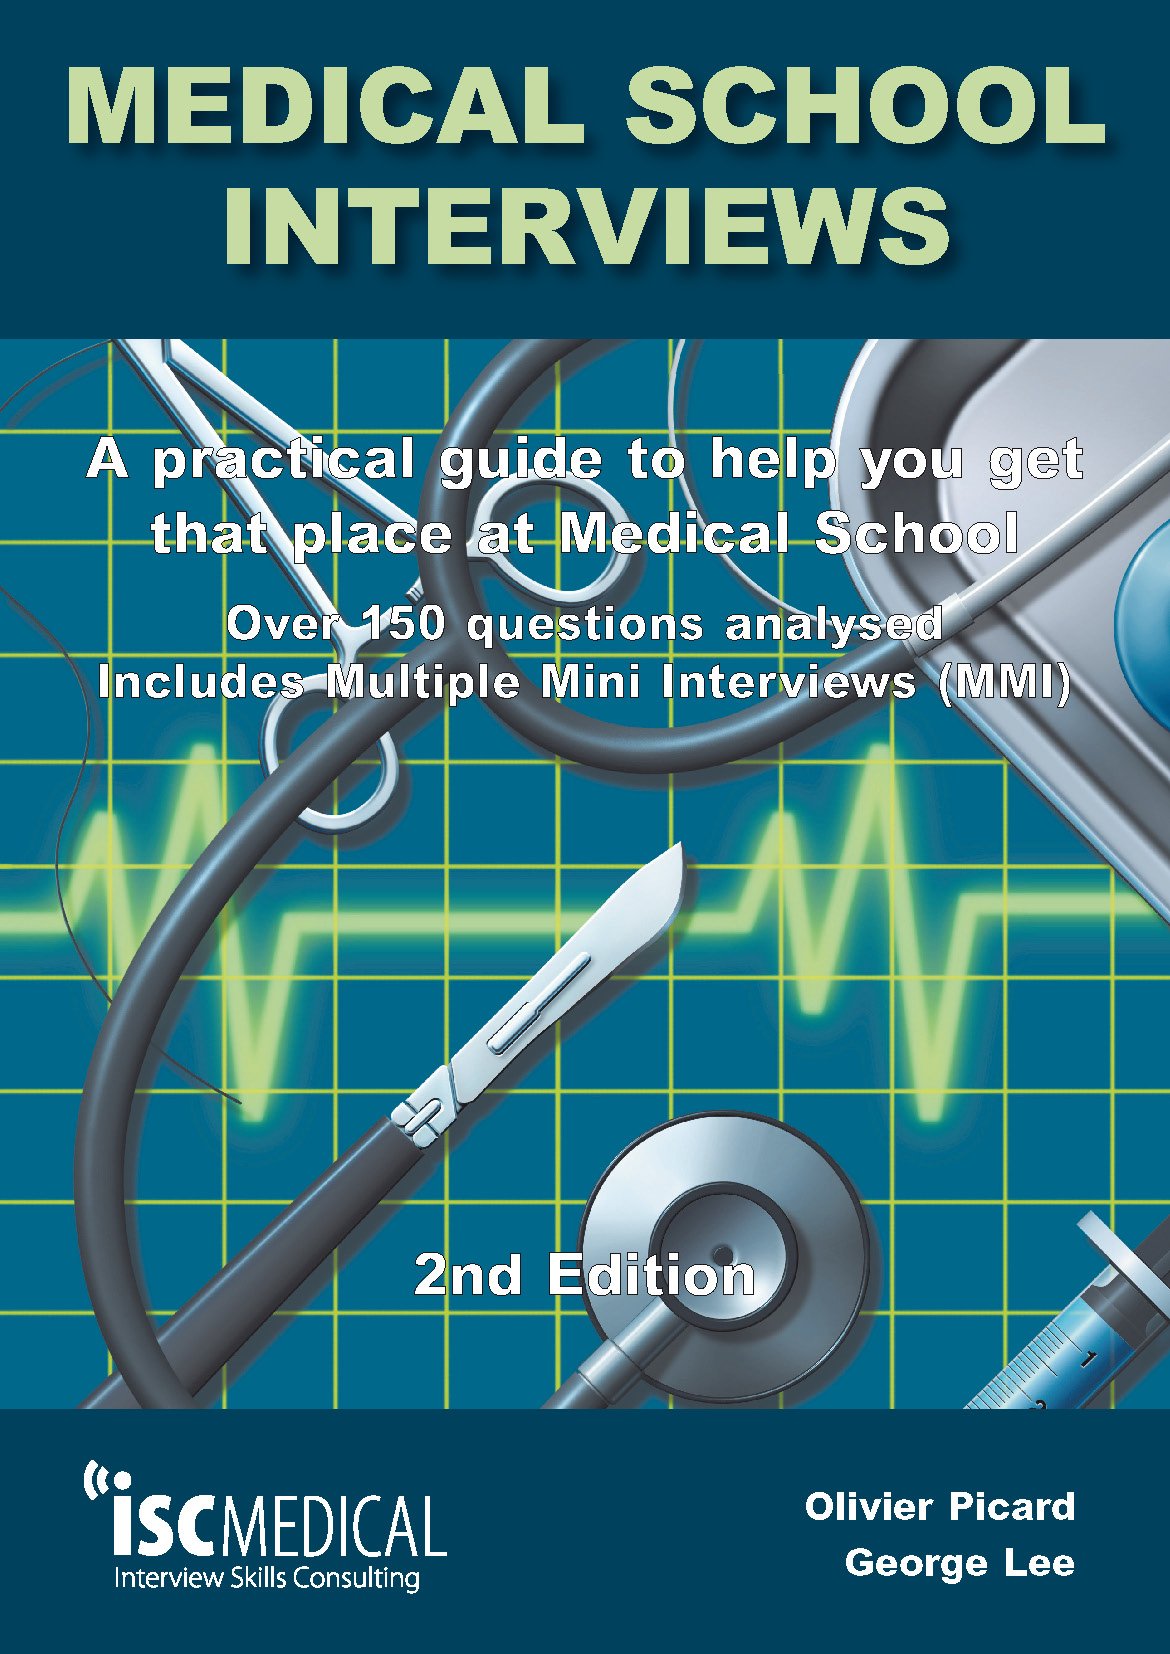 Medical School Interviews: a Practical Guide to Help You Get That Place at Medical School